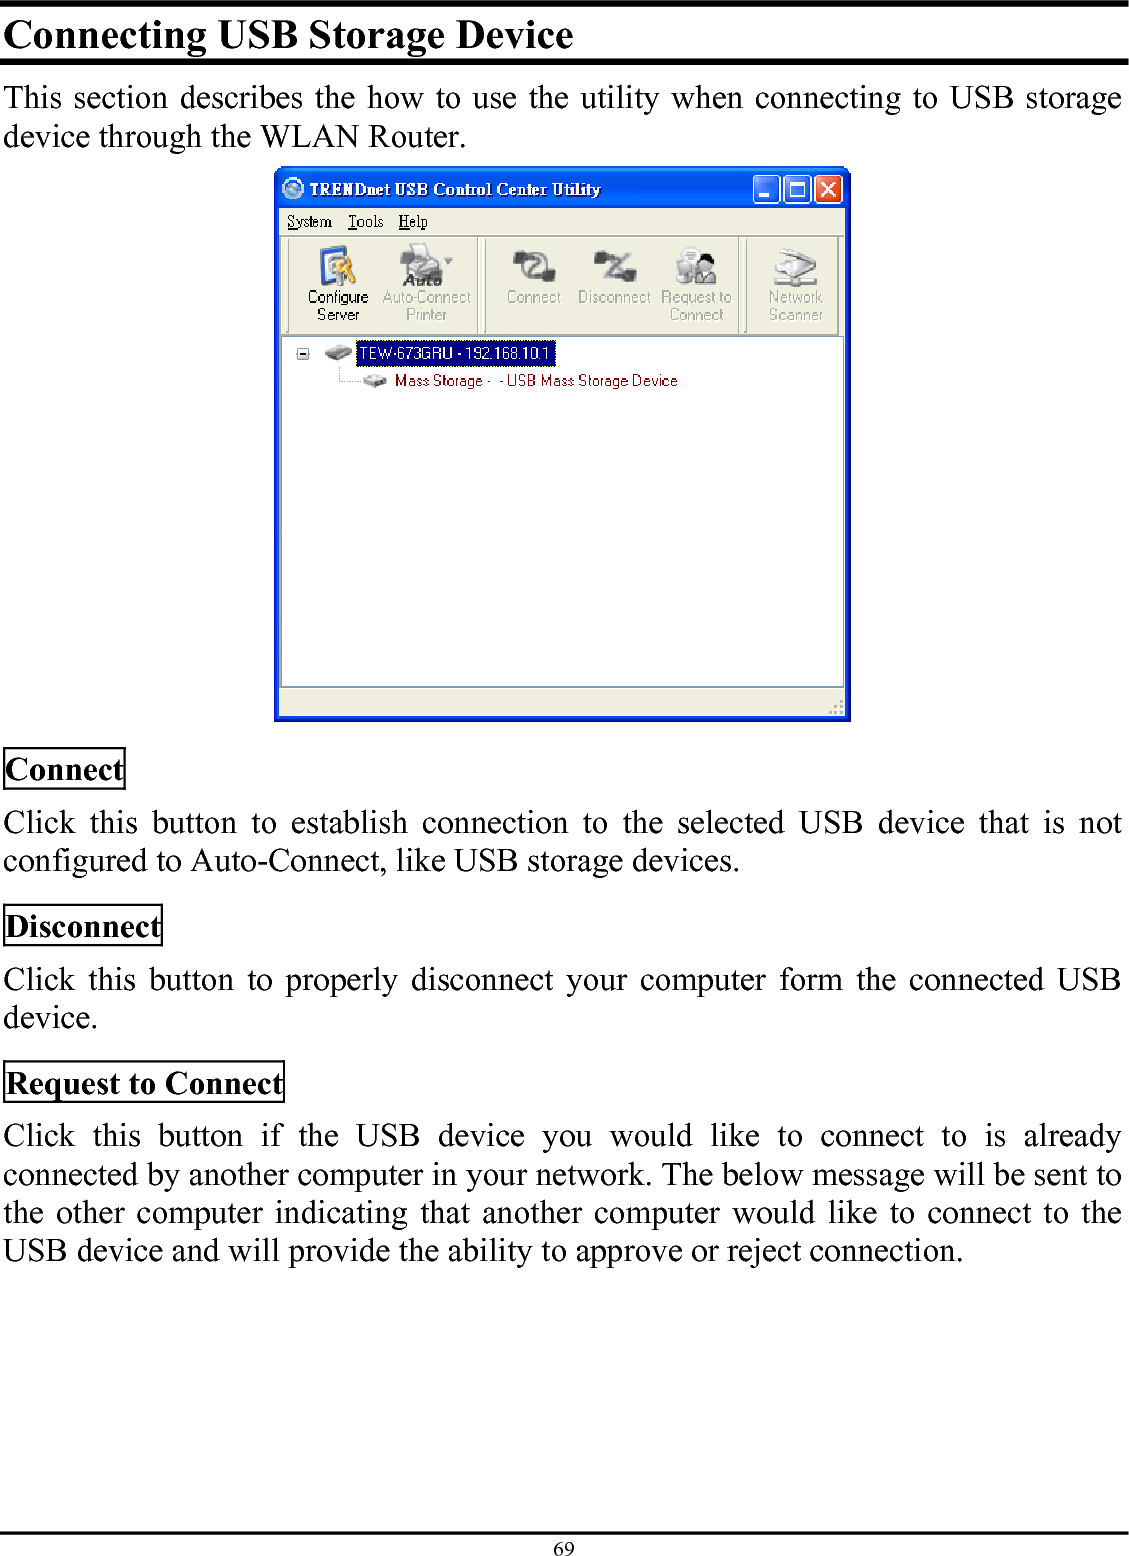 69 Connecting USB Storage Device This section describes the how to use the utility when connecting to USB storage device through the WLAN Router.   Connect Click this button to establish connection to the selected USB device that is not configured to Auto-Connect, like USB storage devices.  Disconnect Click this button to properly disconnect your computer form the connected USB device.  Request to Connect Click this button if the USB device you would like to connect to is already connected by another computer in your network. The below message will be sent to the other computer indicating that another computer would like to connect to the USB device and will provide the ability to approve or reject connection.  